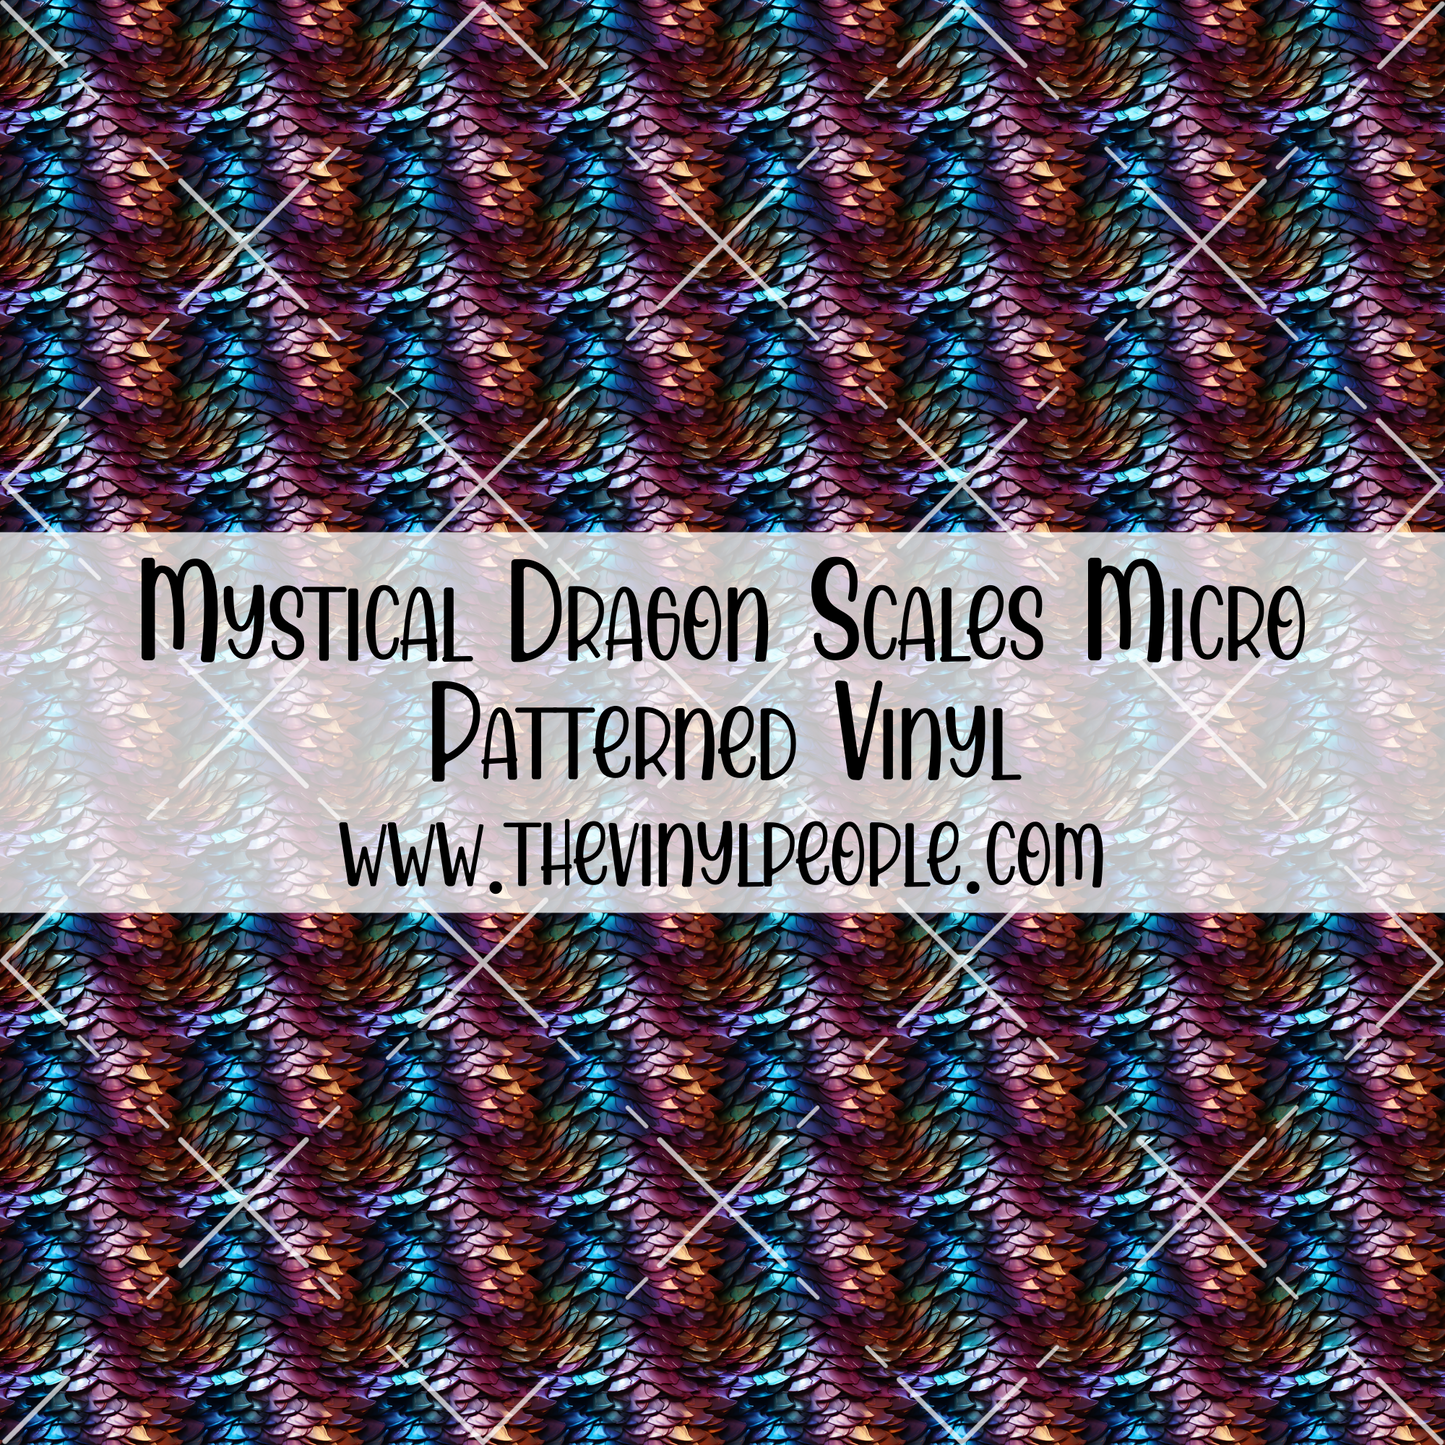 Mystical Dragon Scales Patterned Vinyl